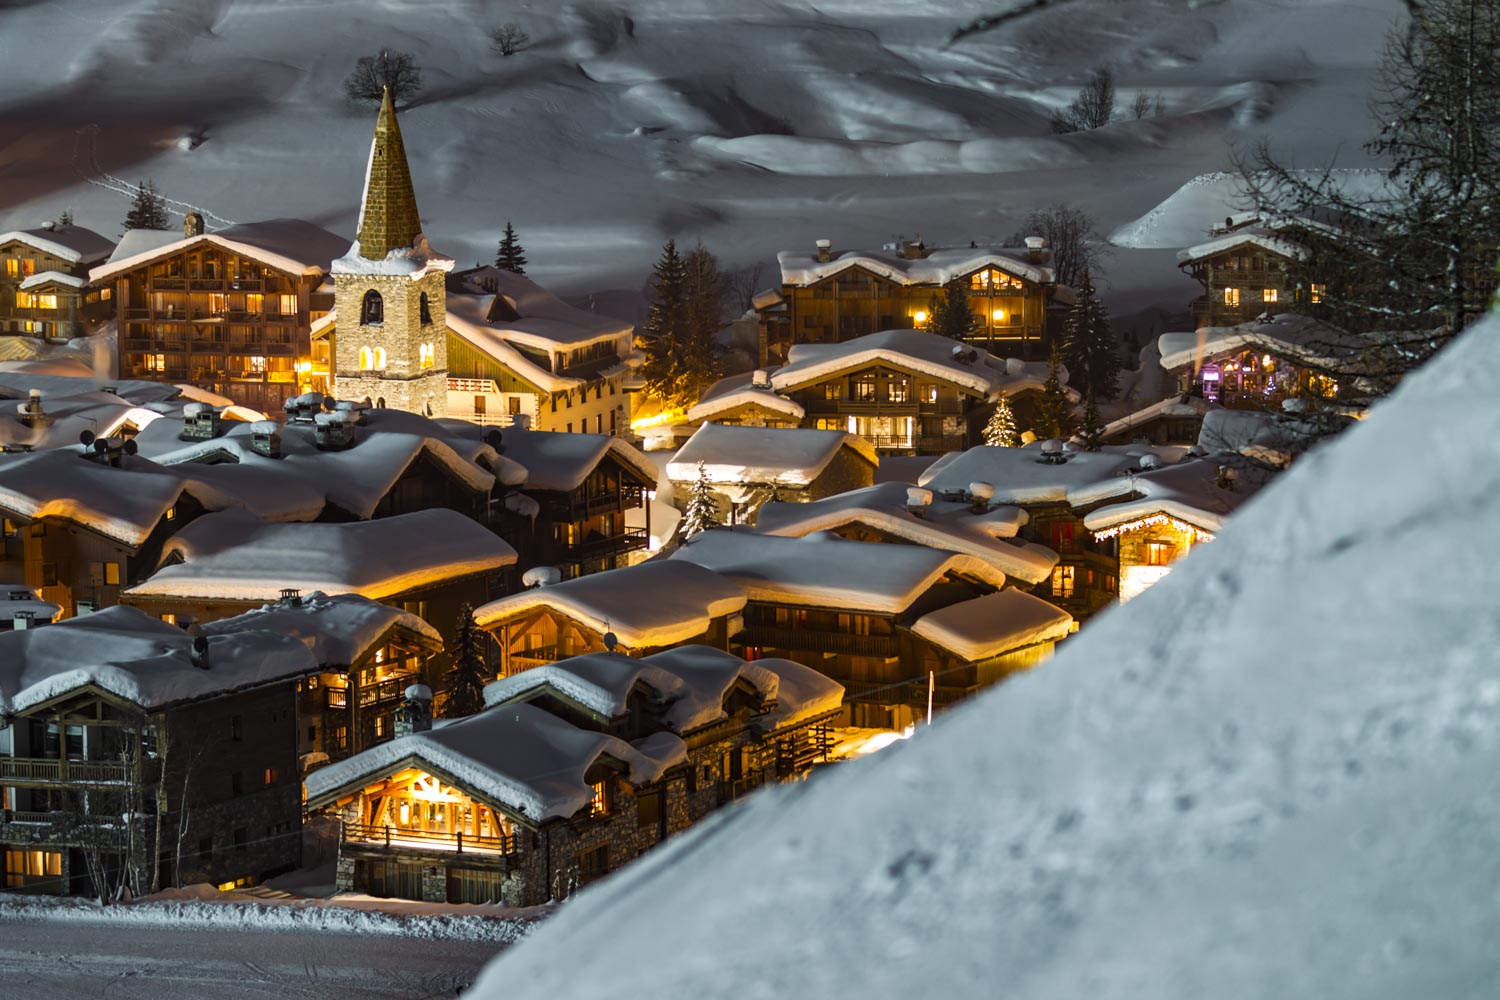 The Village of Val d'IsÃ¨re by Night - Val d'IsÃ¨re in the Snow